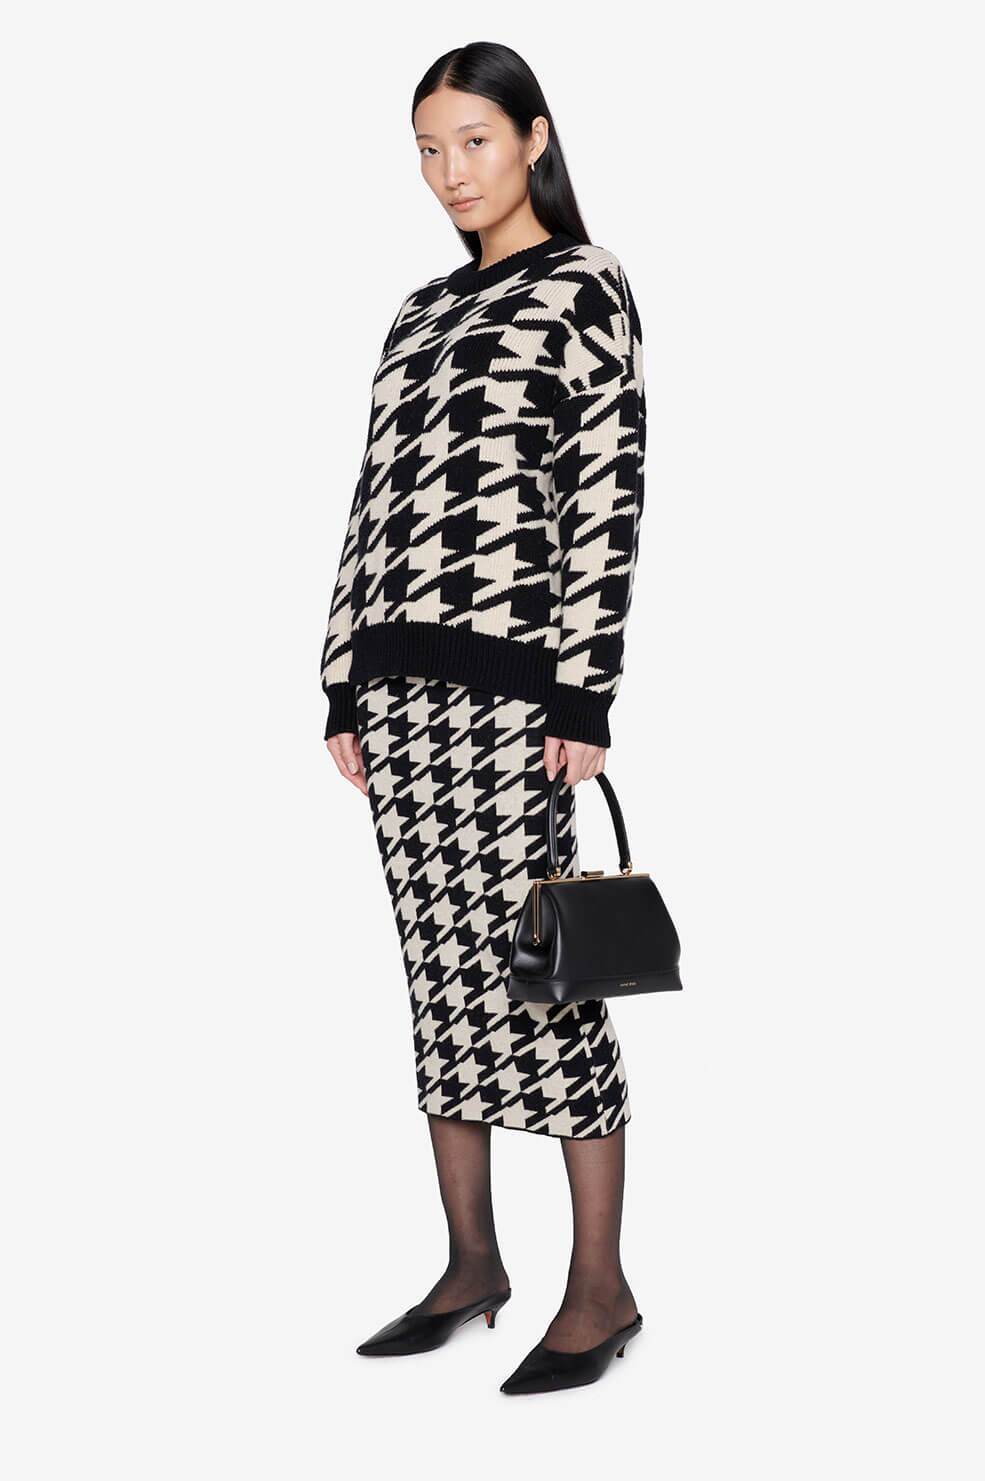 Anine Bing - Reese Skirt in Large Houndstooth